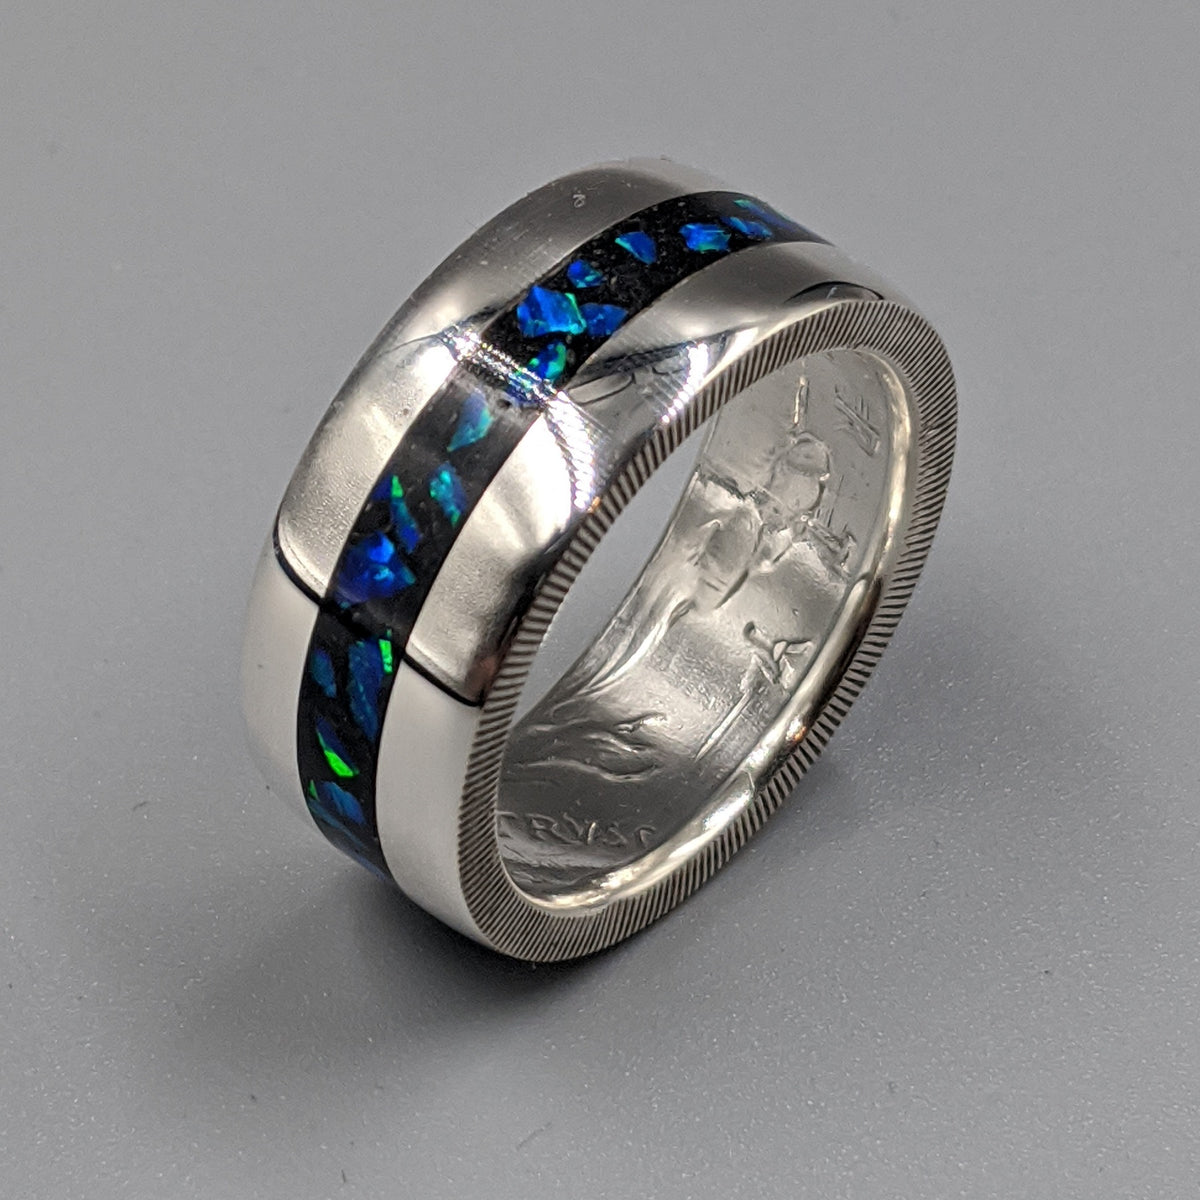 azure blue opal flashing blue and green in a cremation ash coin ring